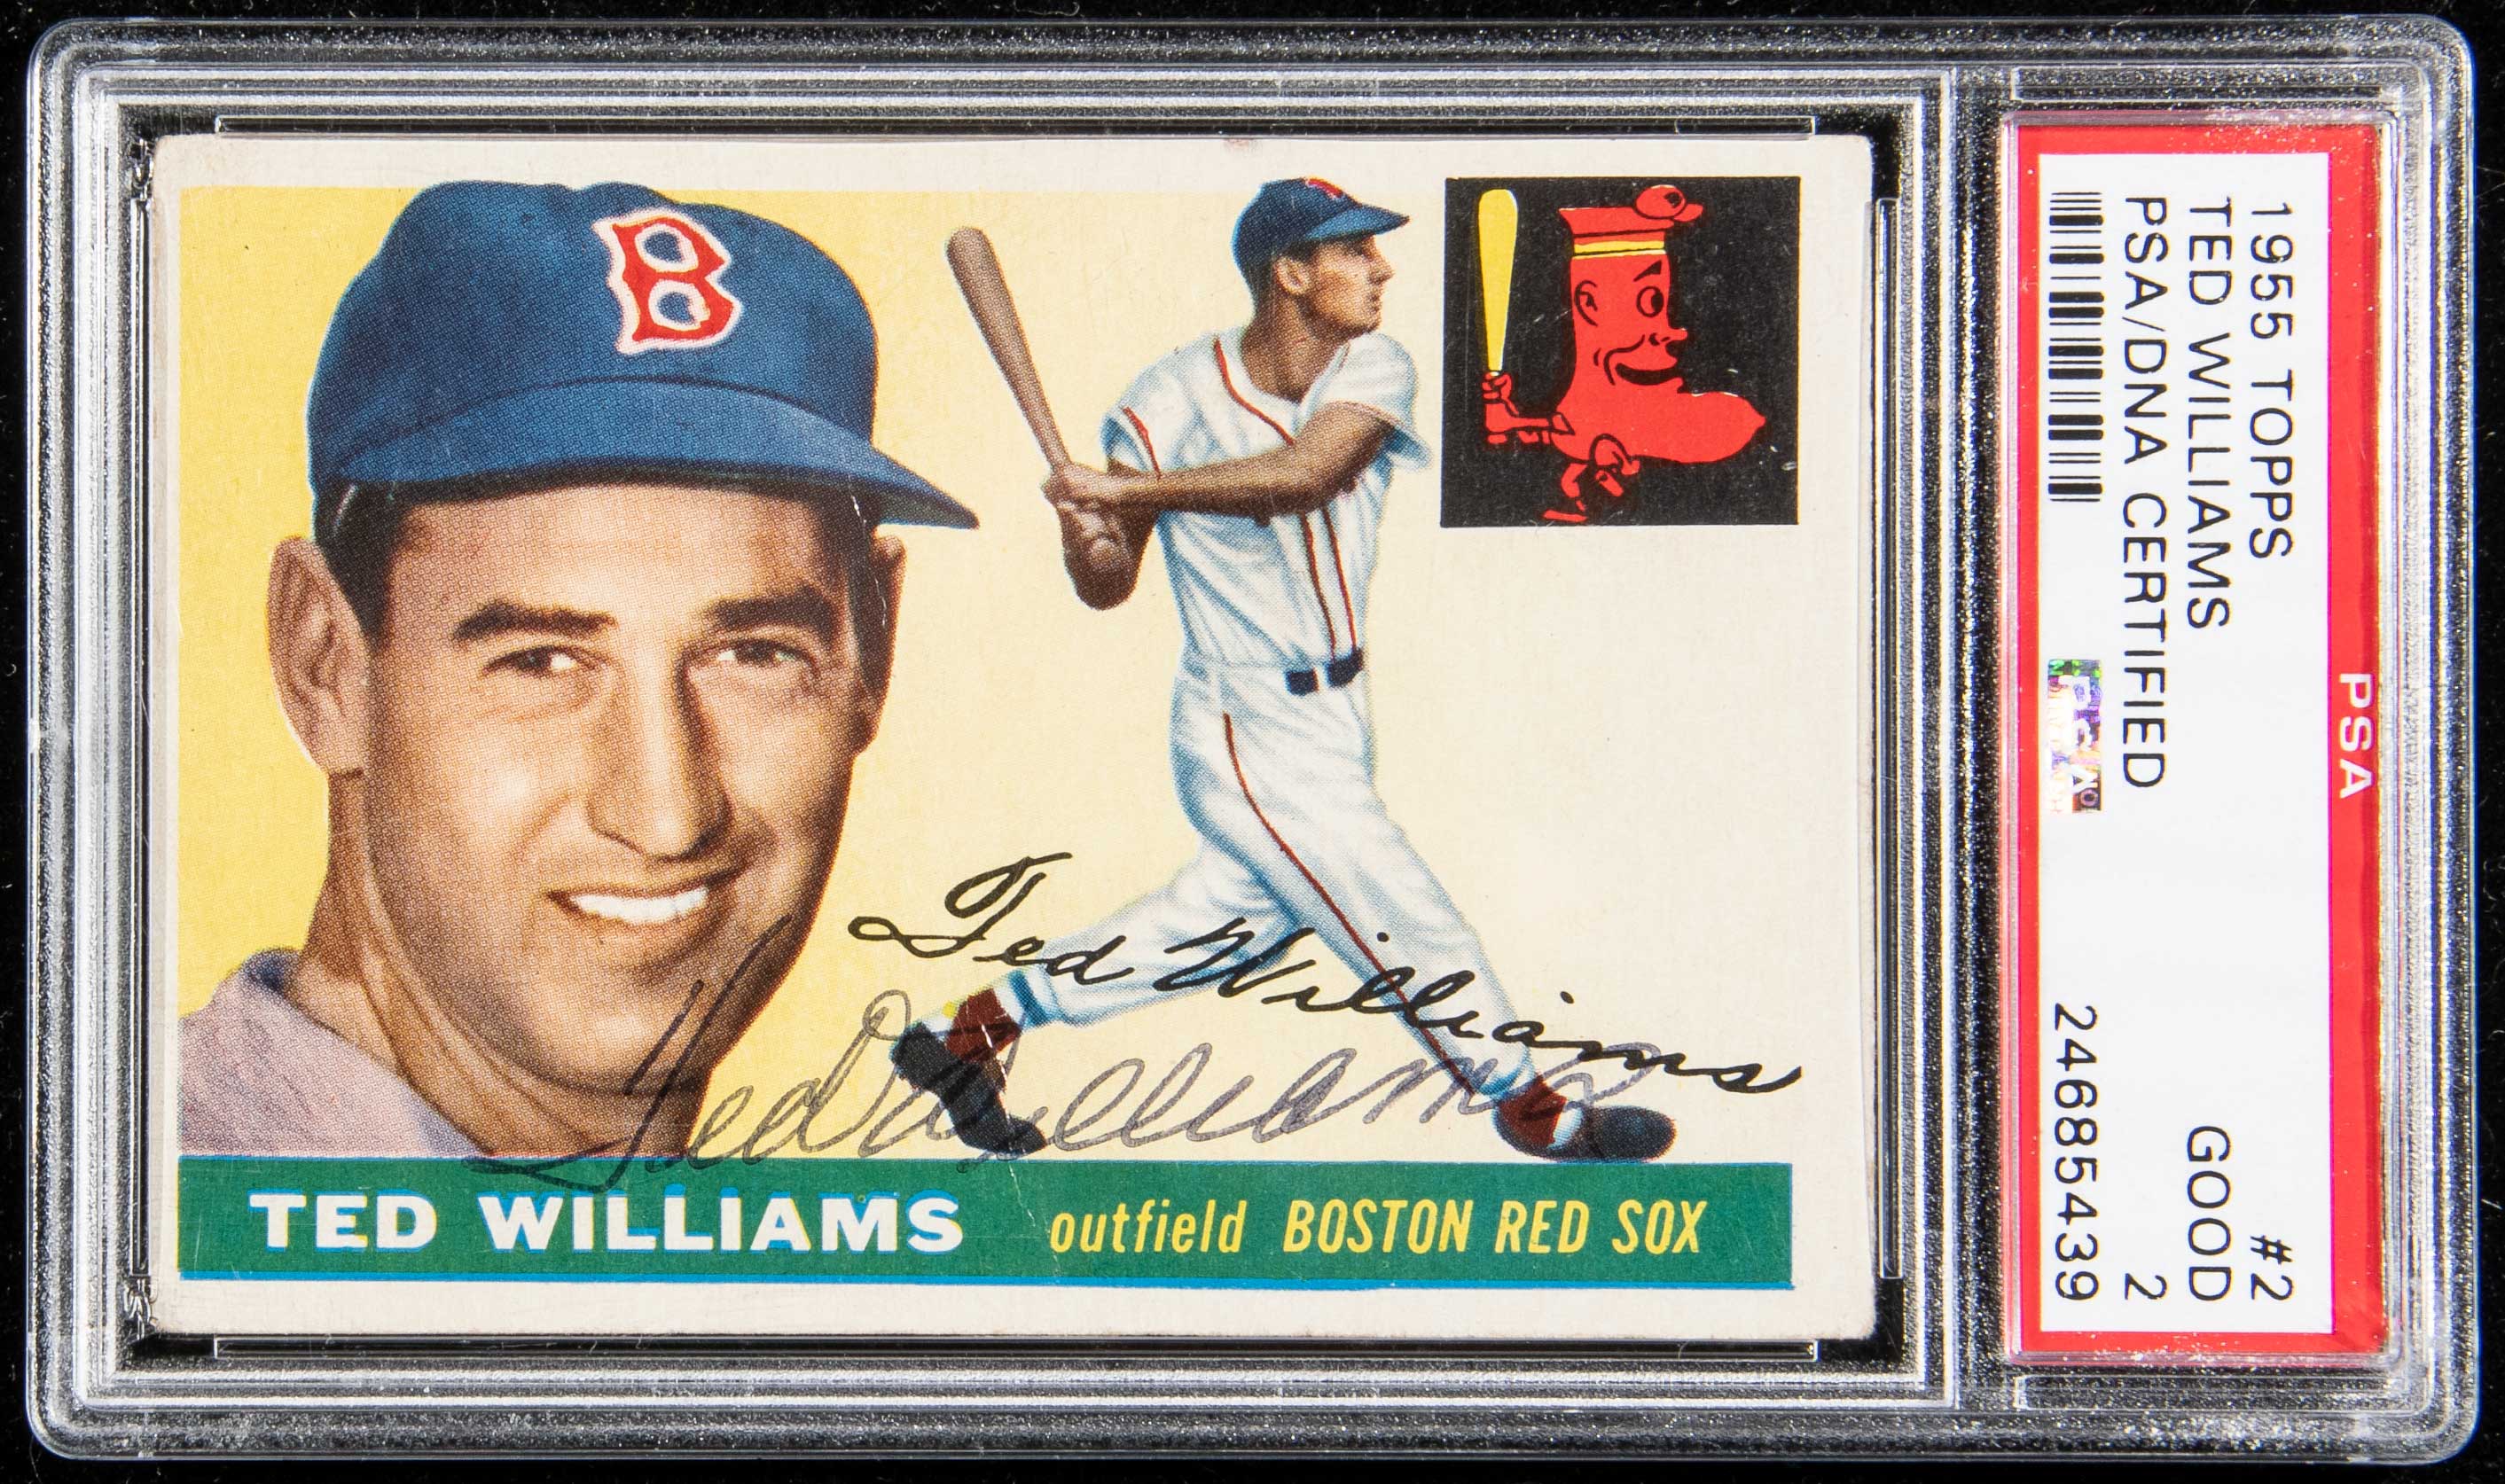 Ted Williams Autographed Signed 1955 Topps Card #2 Boston Red Sox PSA/DNA